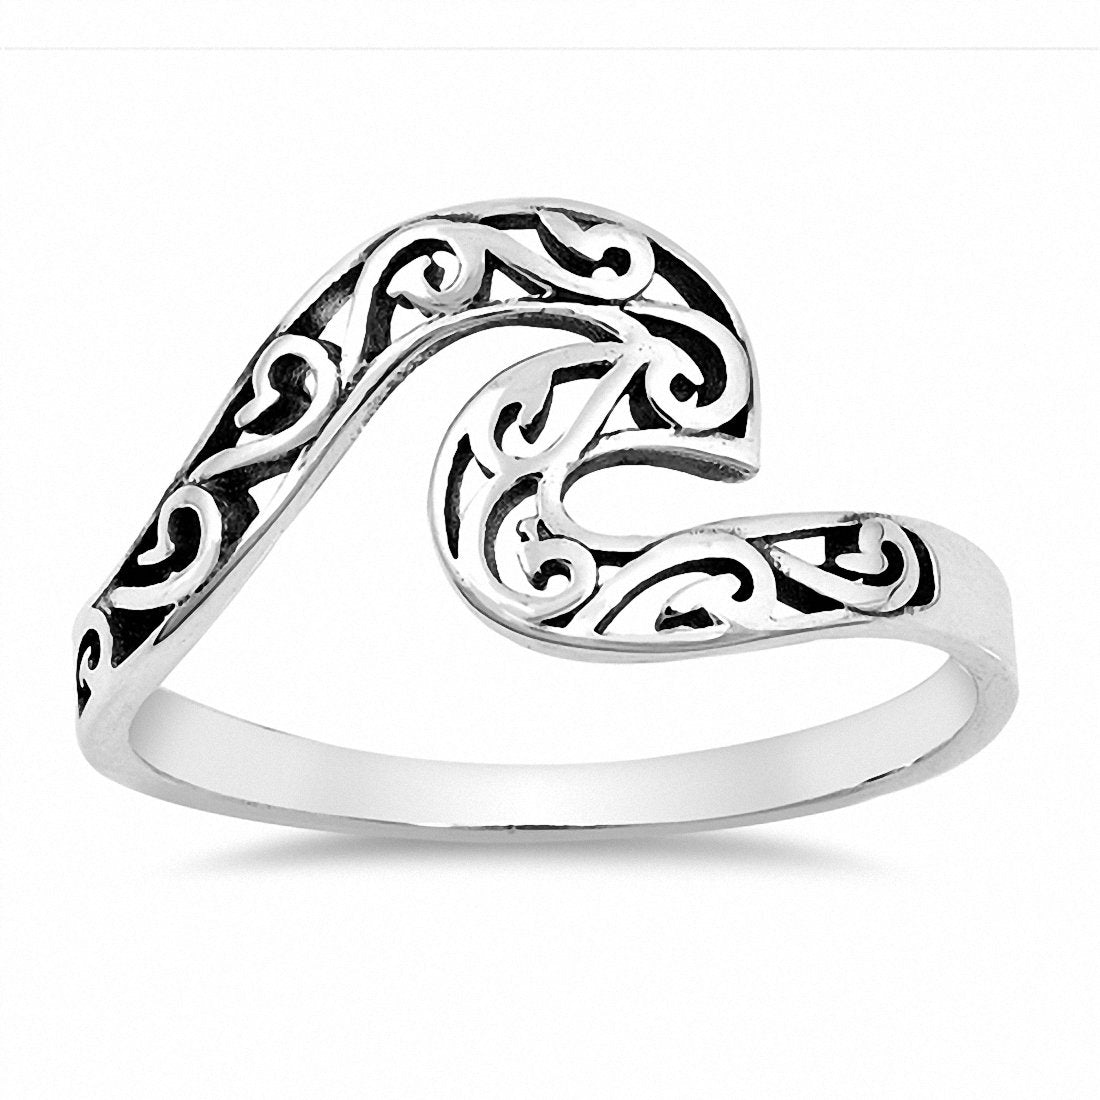 Filigree Wave Ring Band 925 Sterling Silver